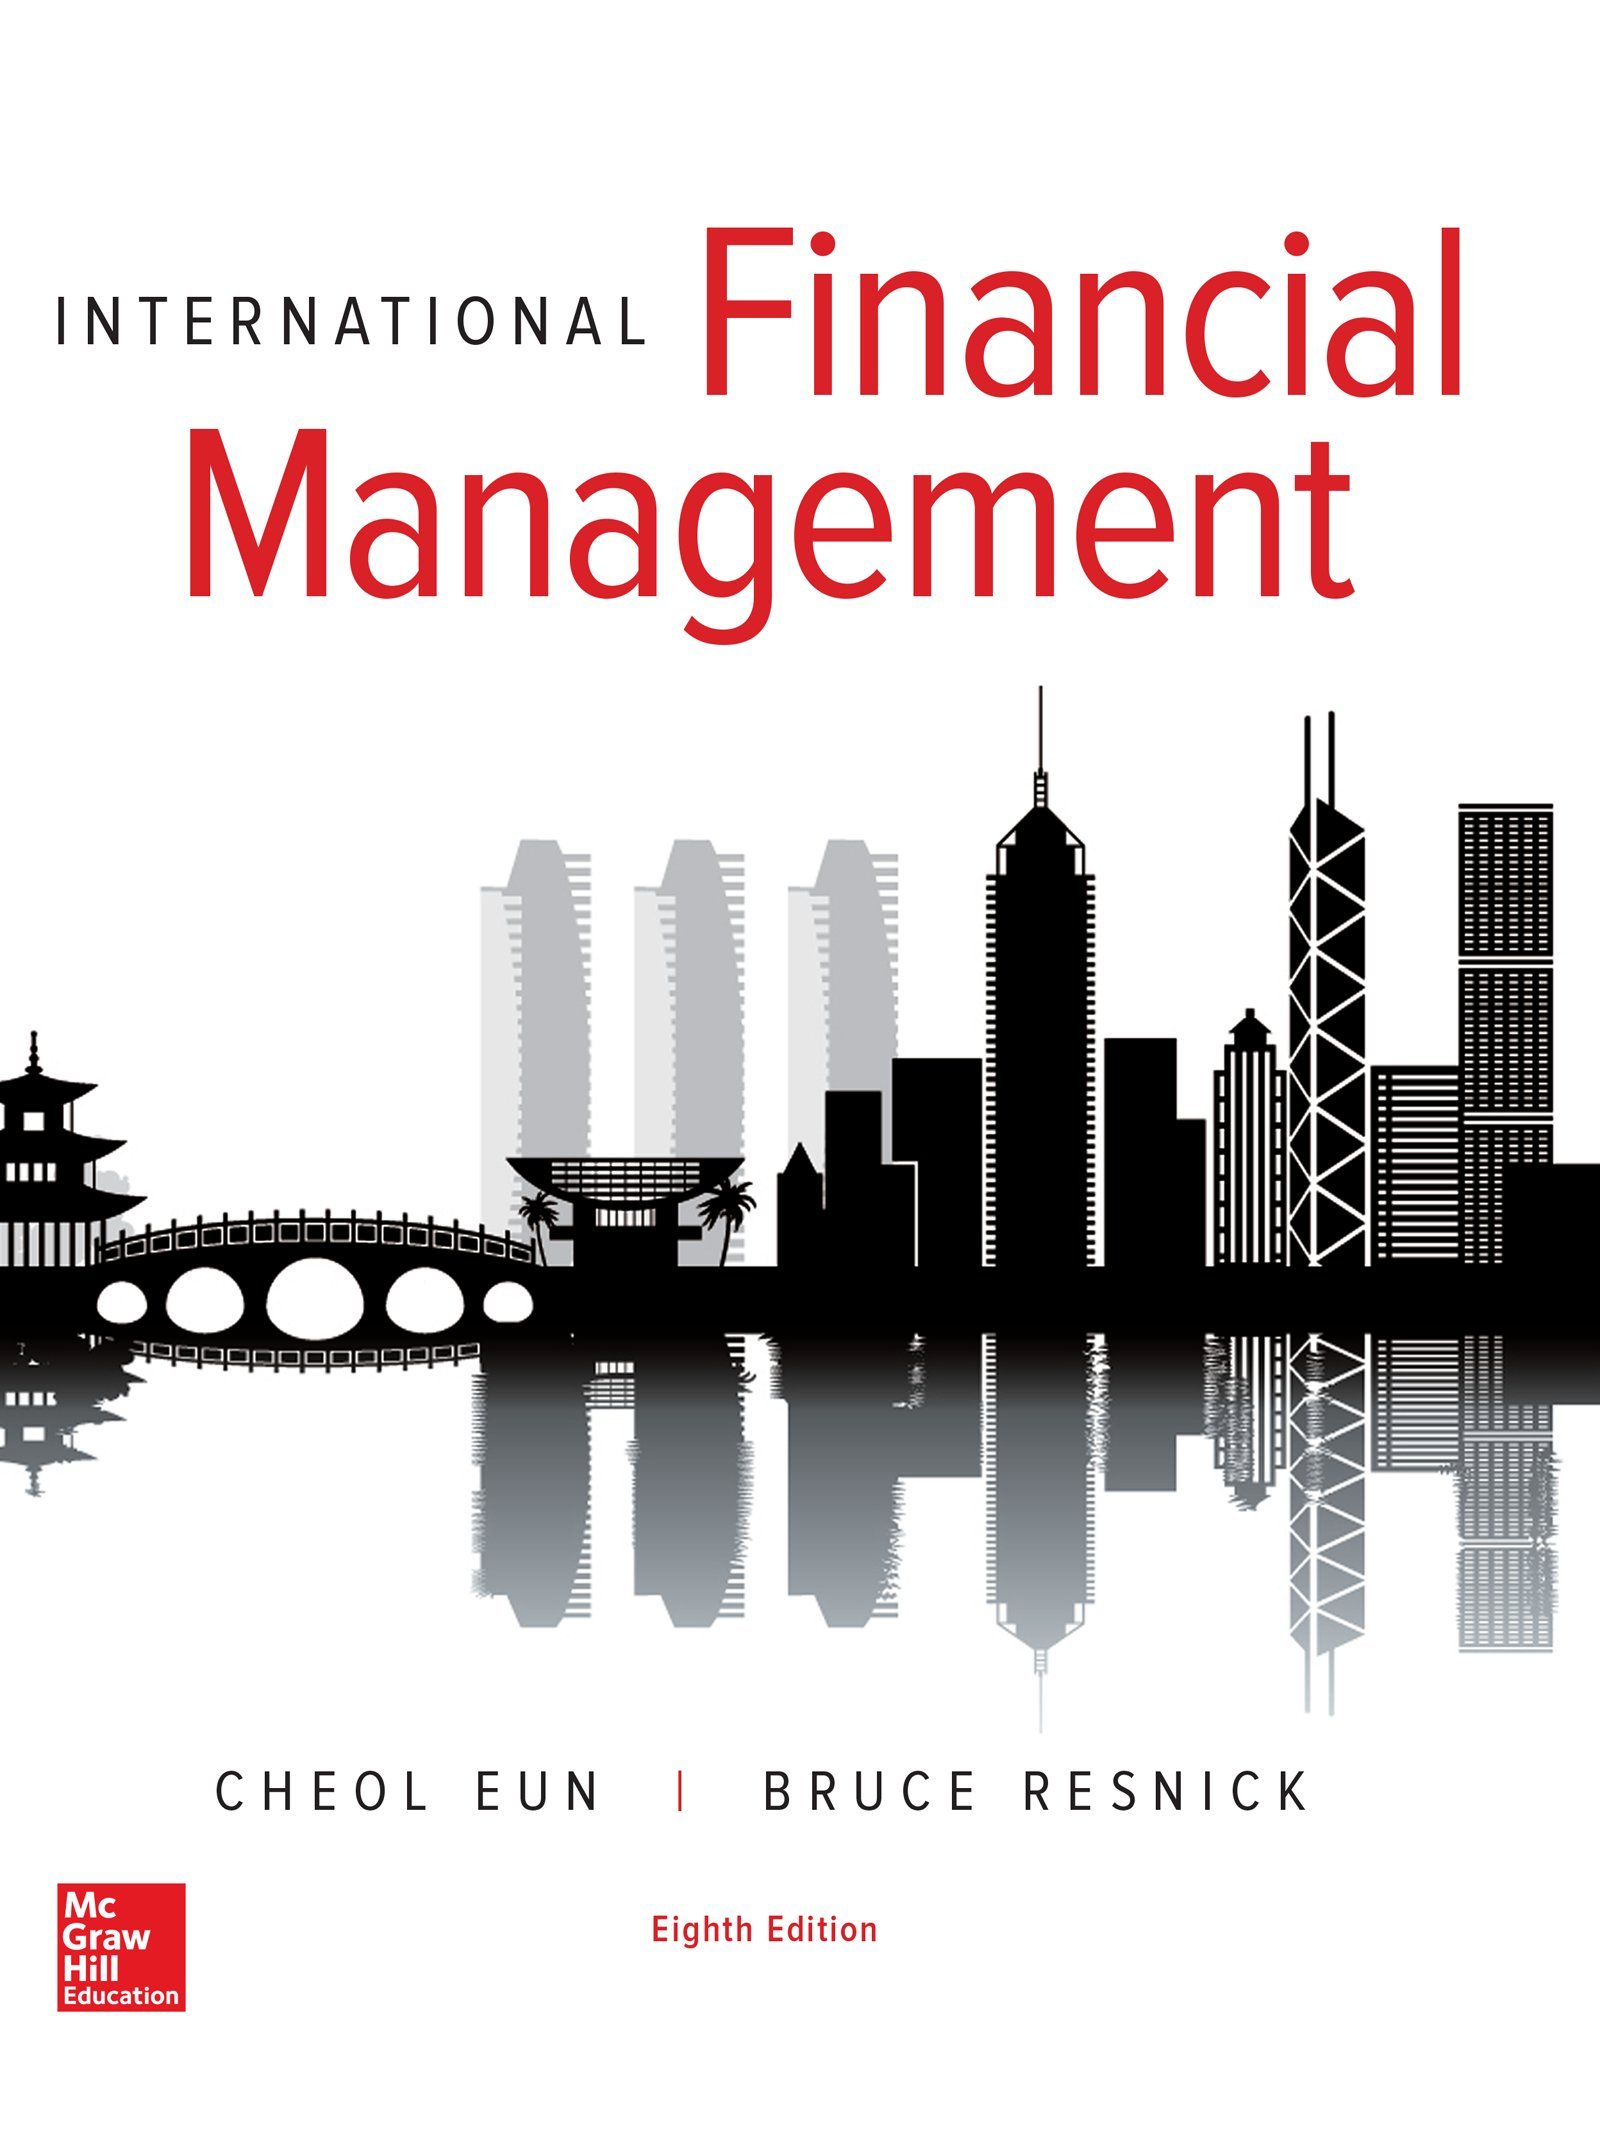 INTERNATIONAL FINANCIAL MANAGEMENT Solutions Manual read online at BusinessBooks.cc